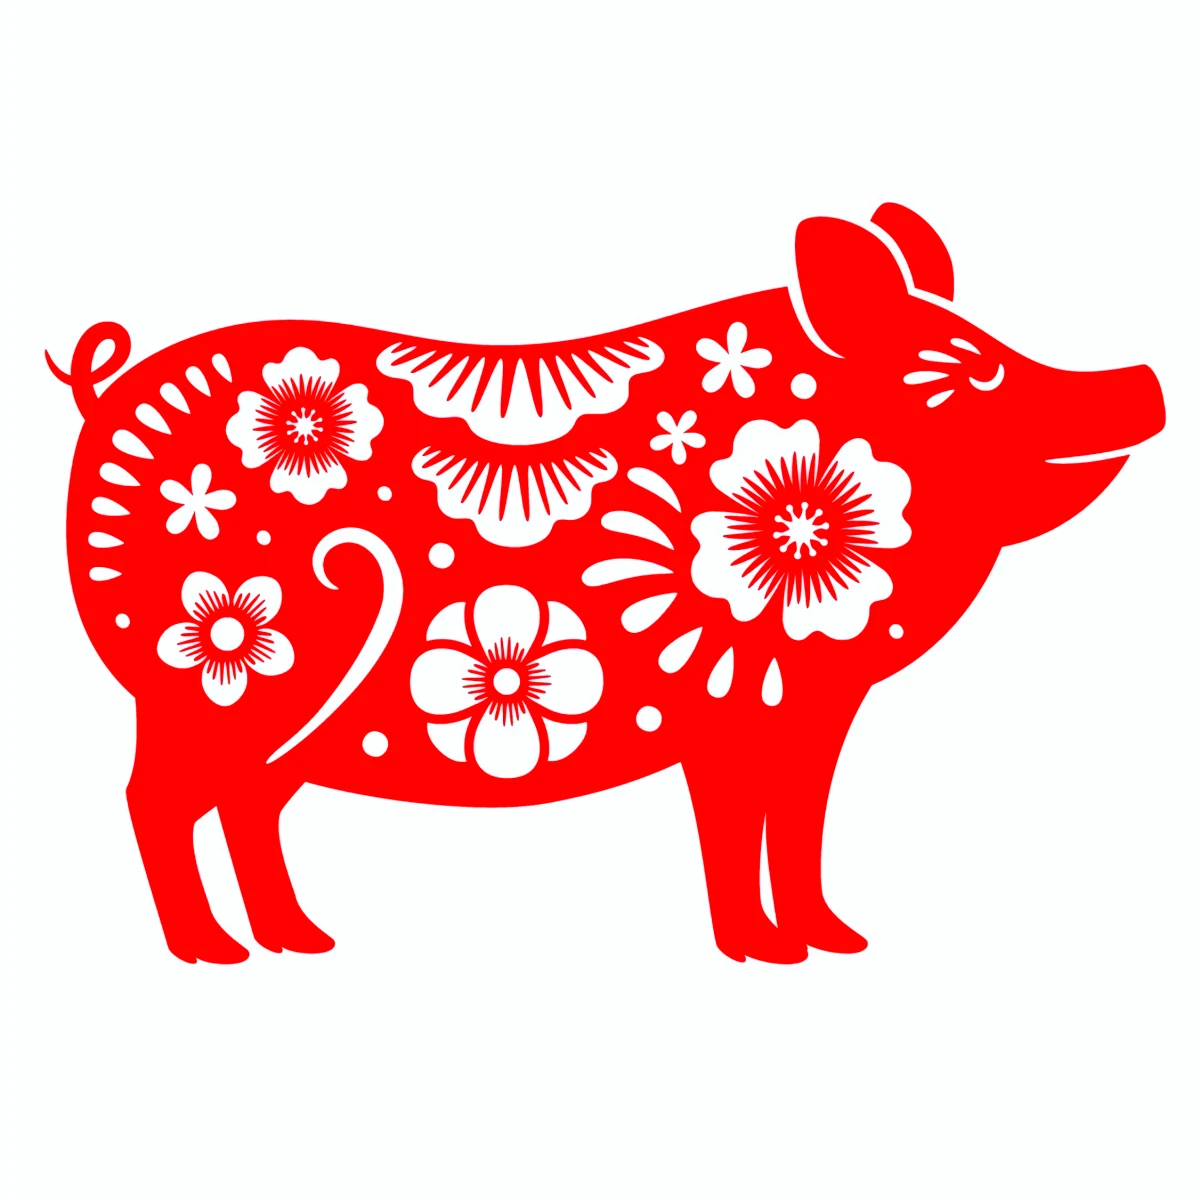 red pig chinese zodiac sign